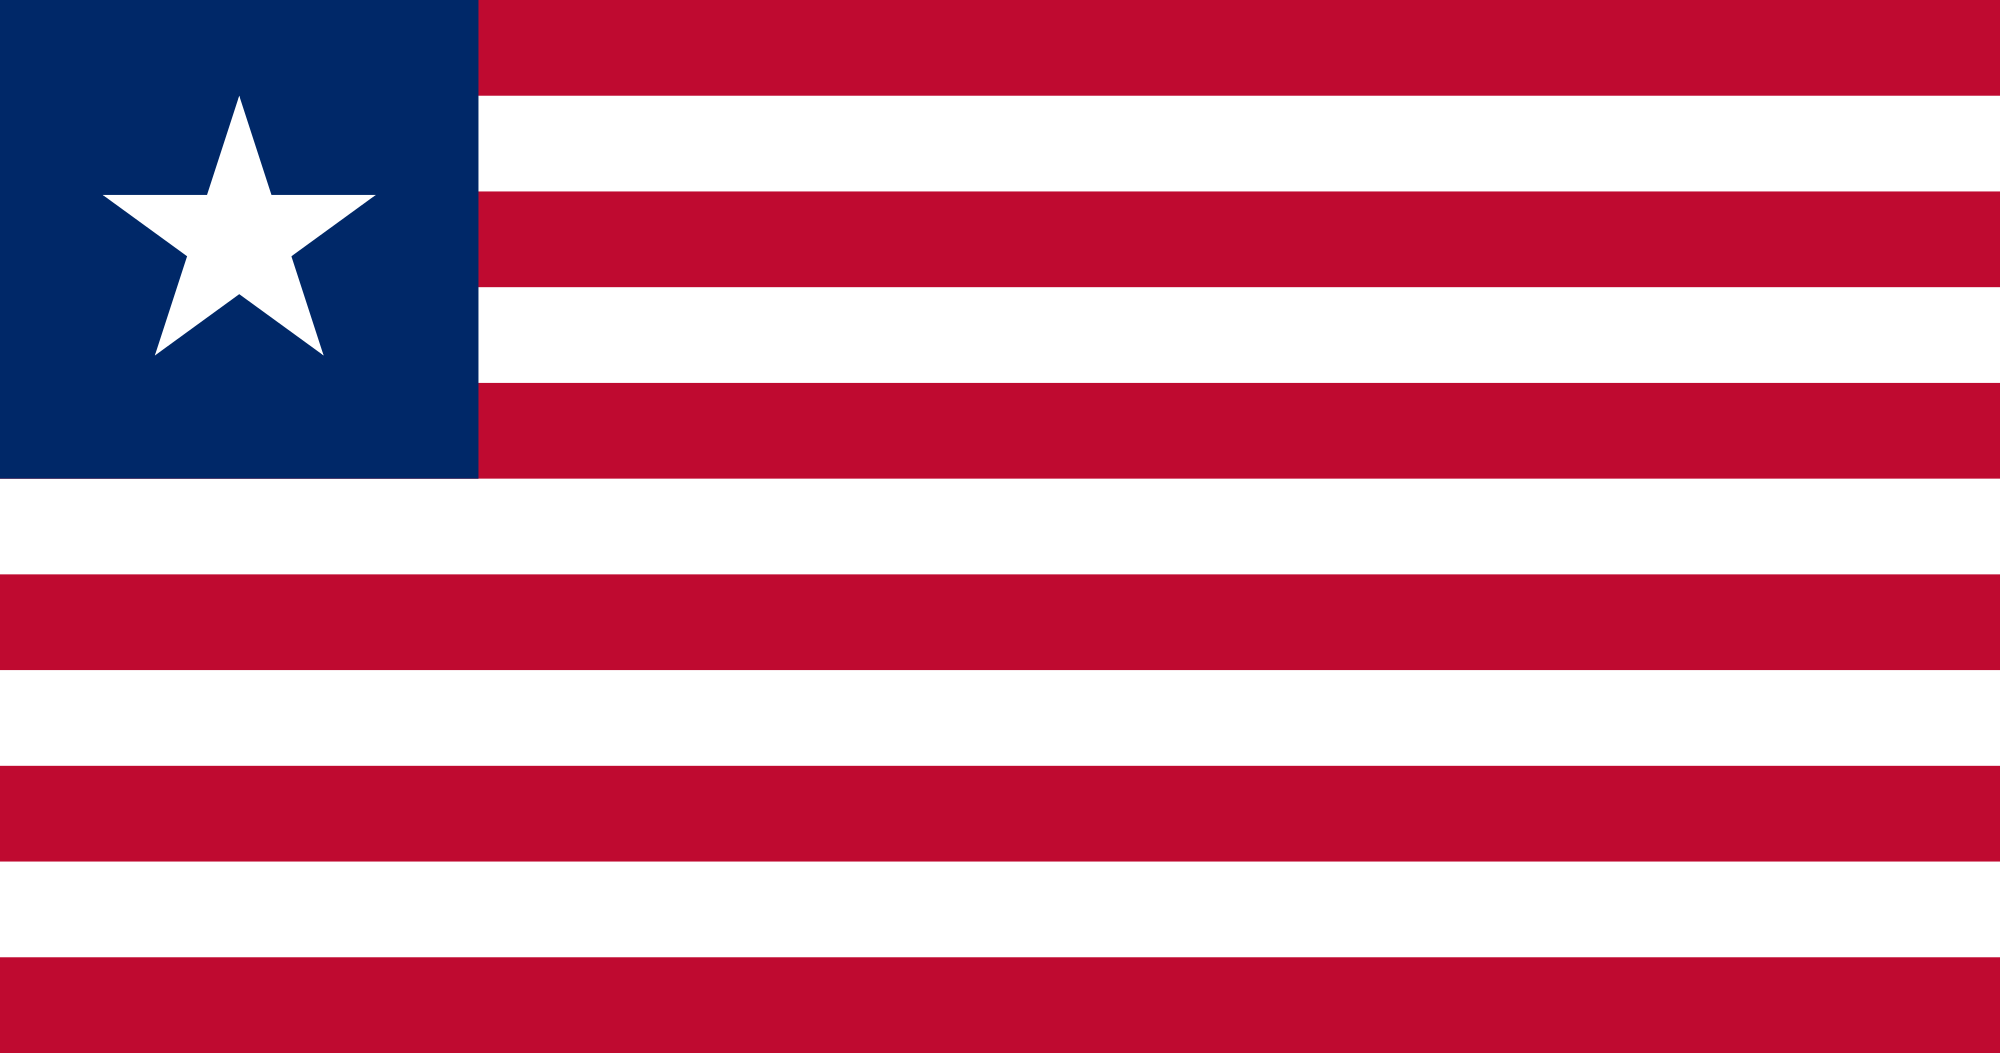 Liberian court cancels referendum on presidential terms and dual citizenship